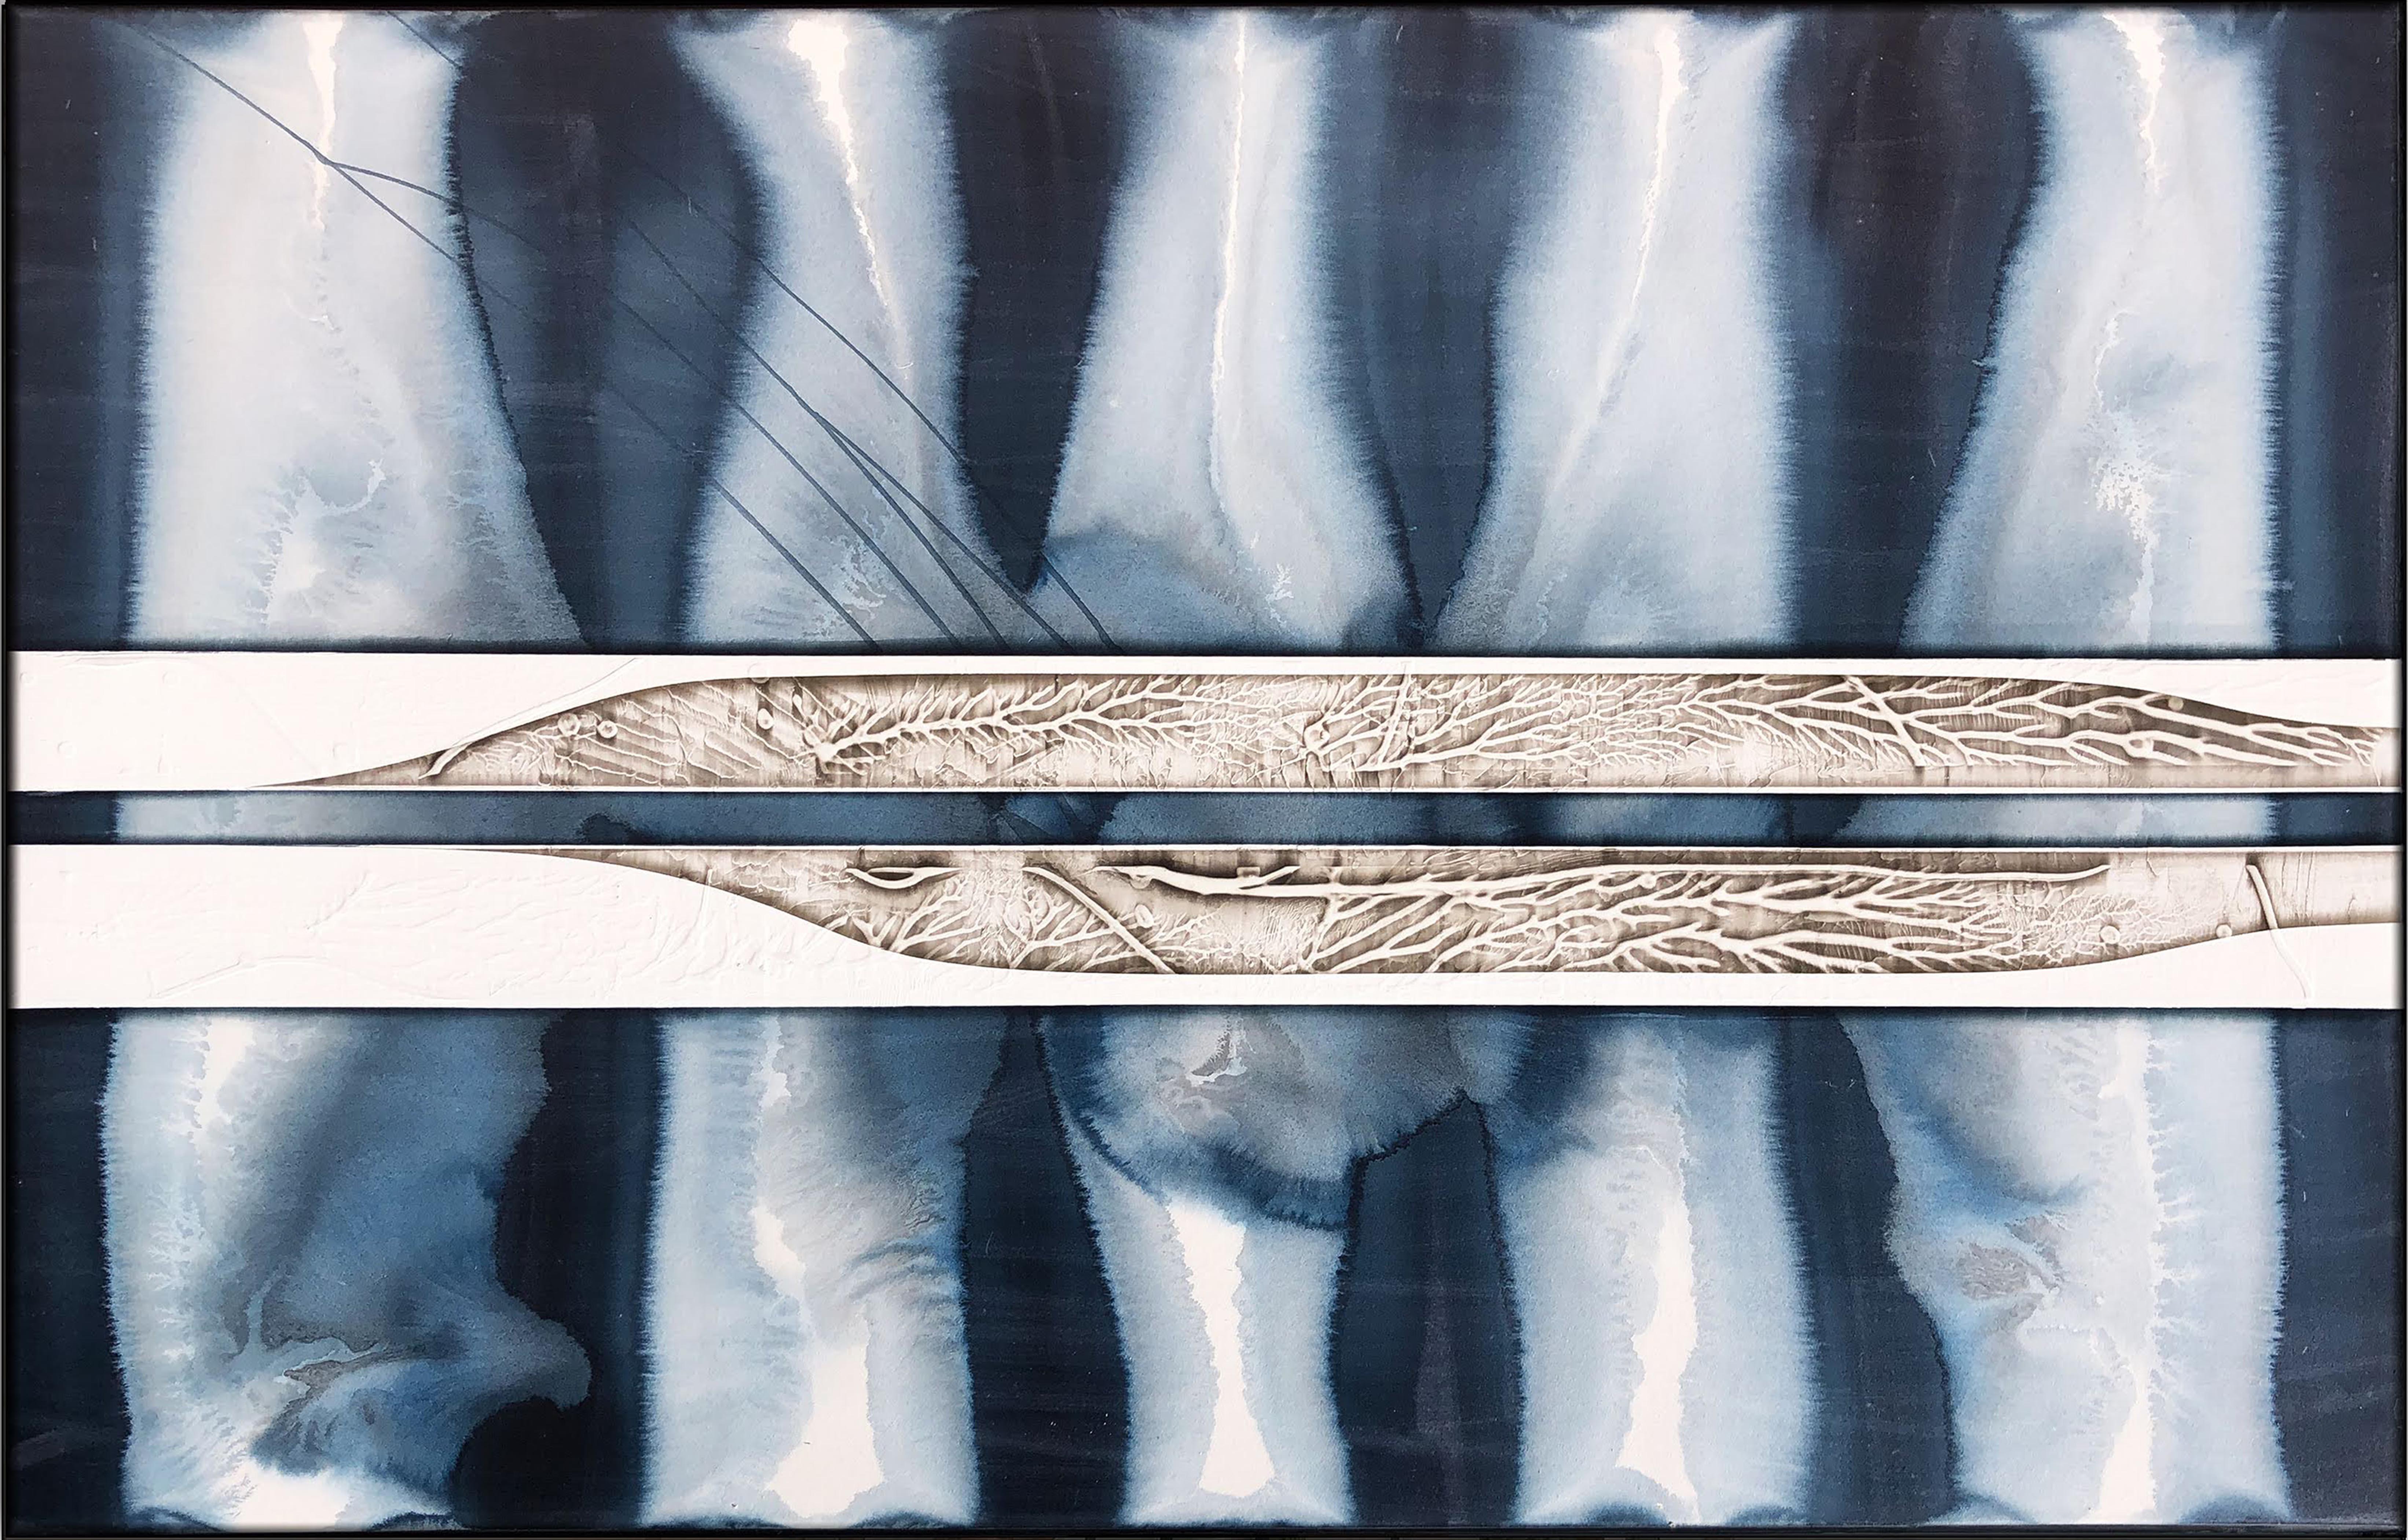 Rippled (1) (abstract landscape, trunks & branches, patterns, blues, white, tan) - Mixed Media Art by Michael Kessler